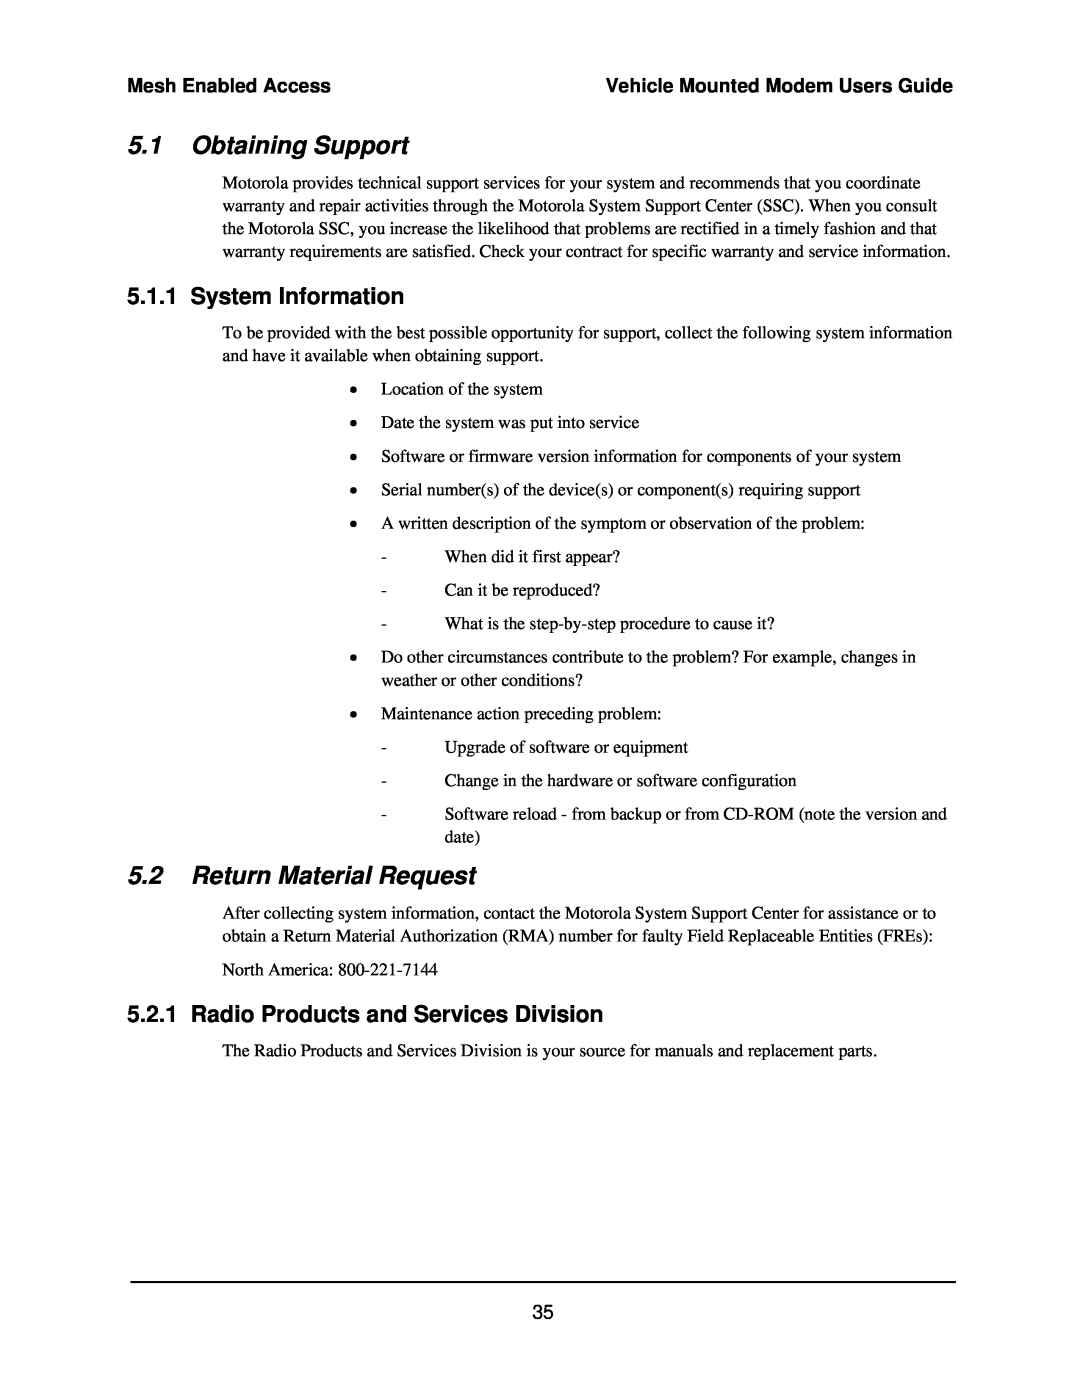 Motorola 3.1 manual Obtaining Support, Return Material Request, System Information, Radio Products and Services Division 